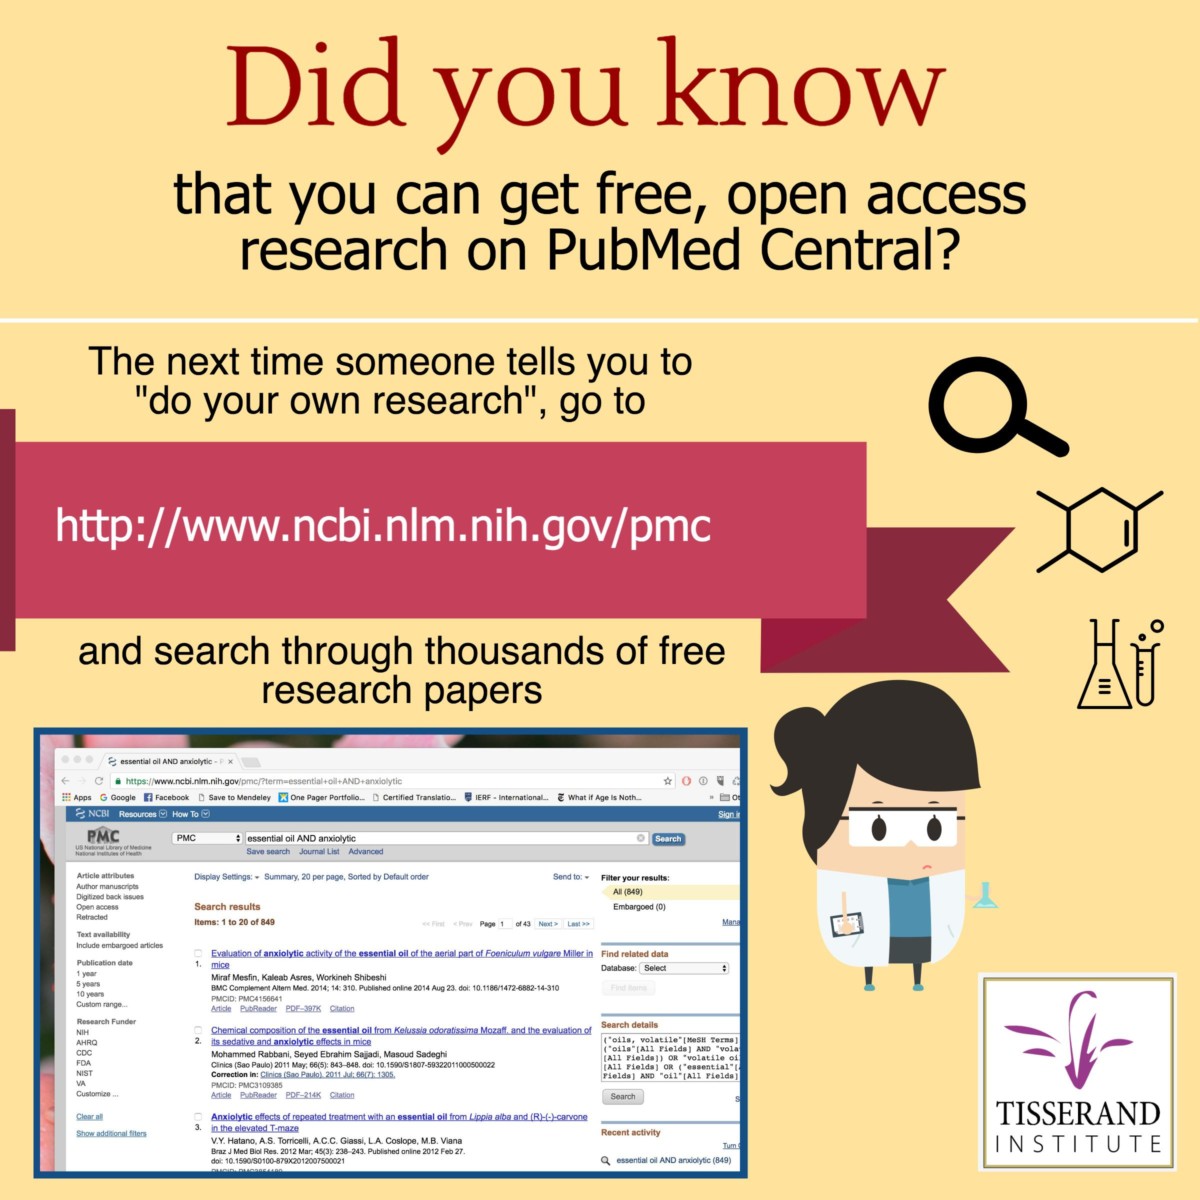 website to access research papers